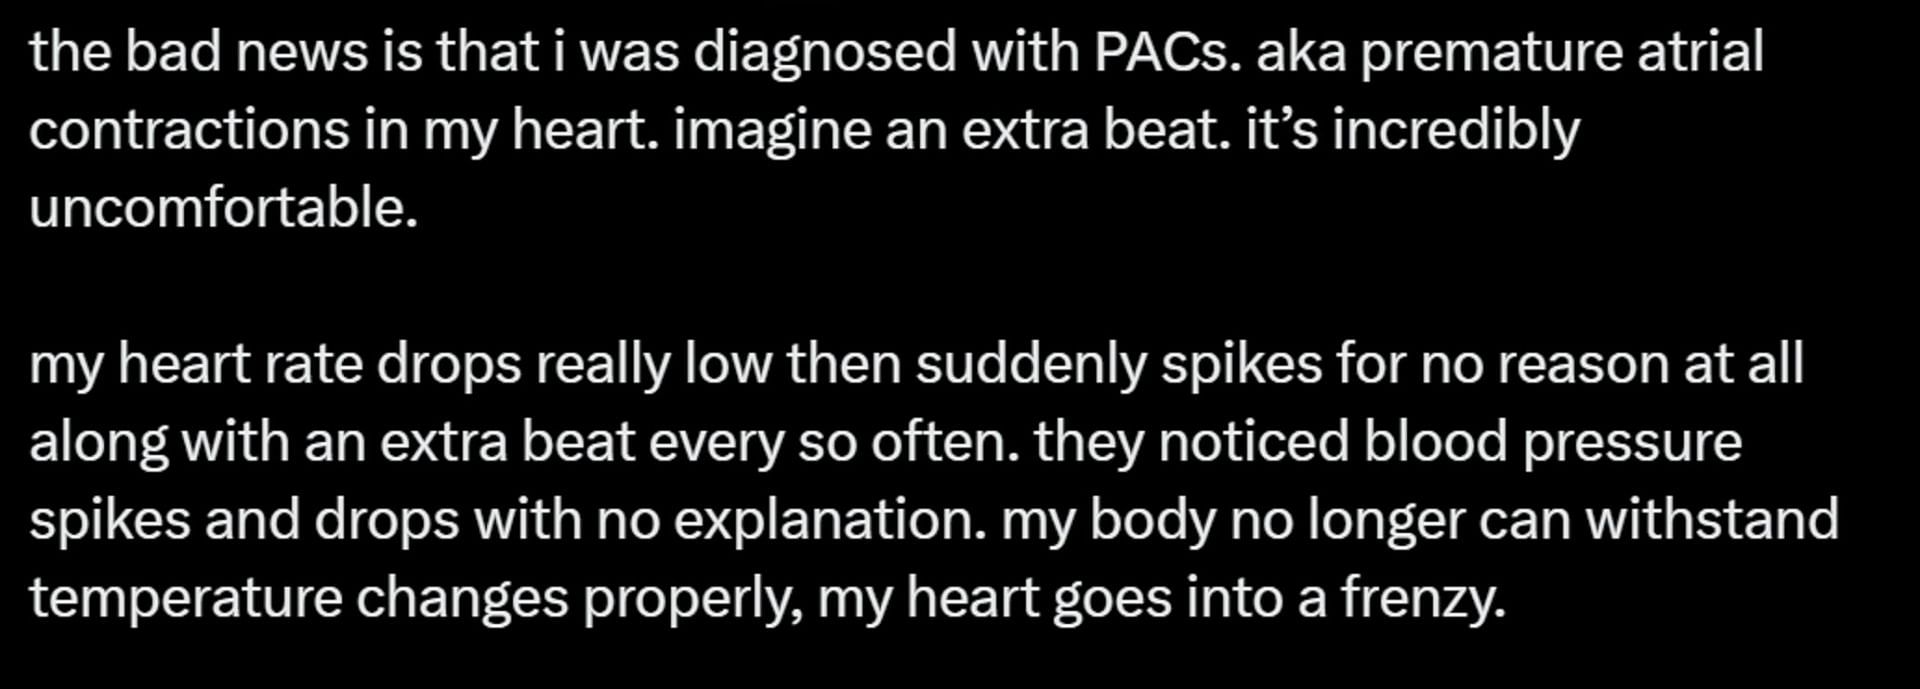 YouTuber reveals being diagnosed with PACs. (Image via X/@McJuggerNuggets)